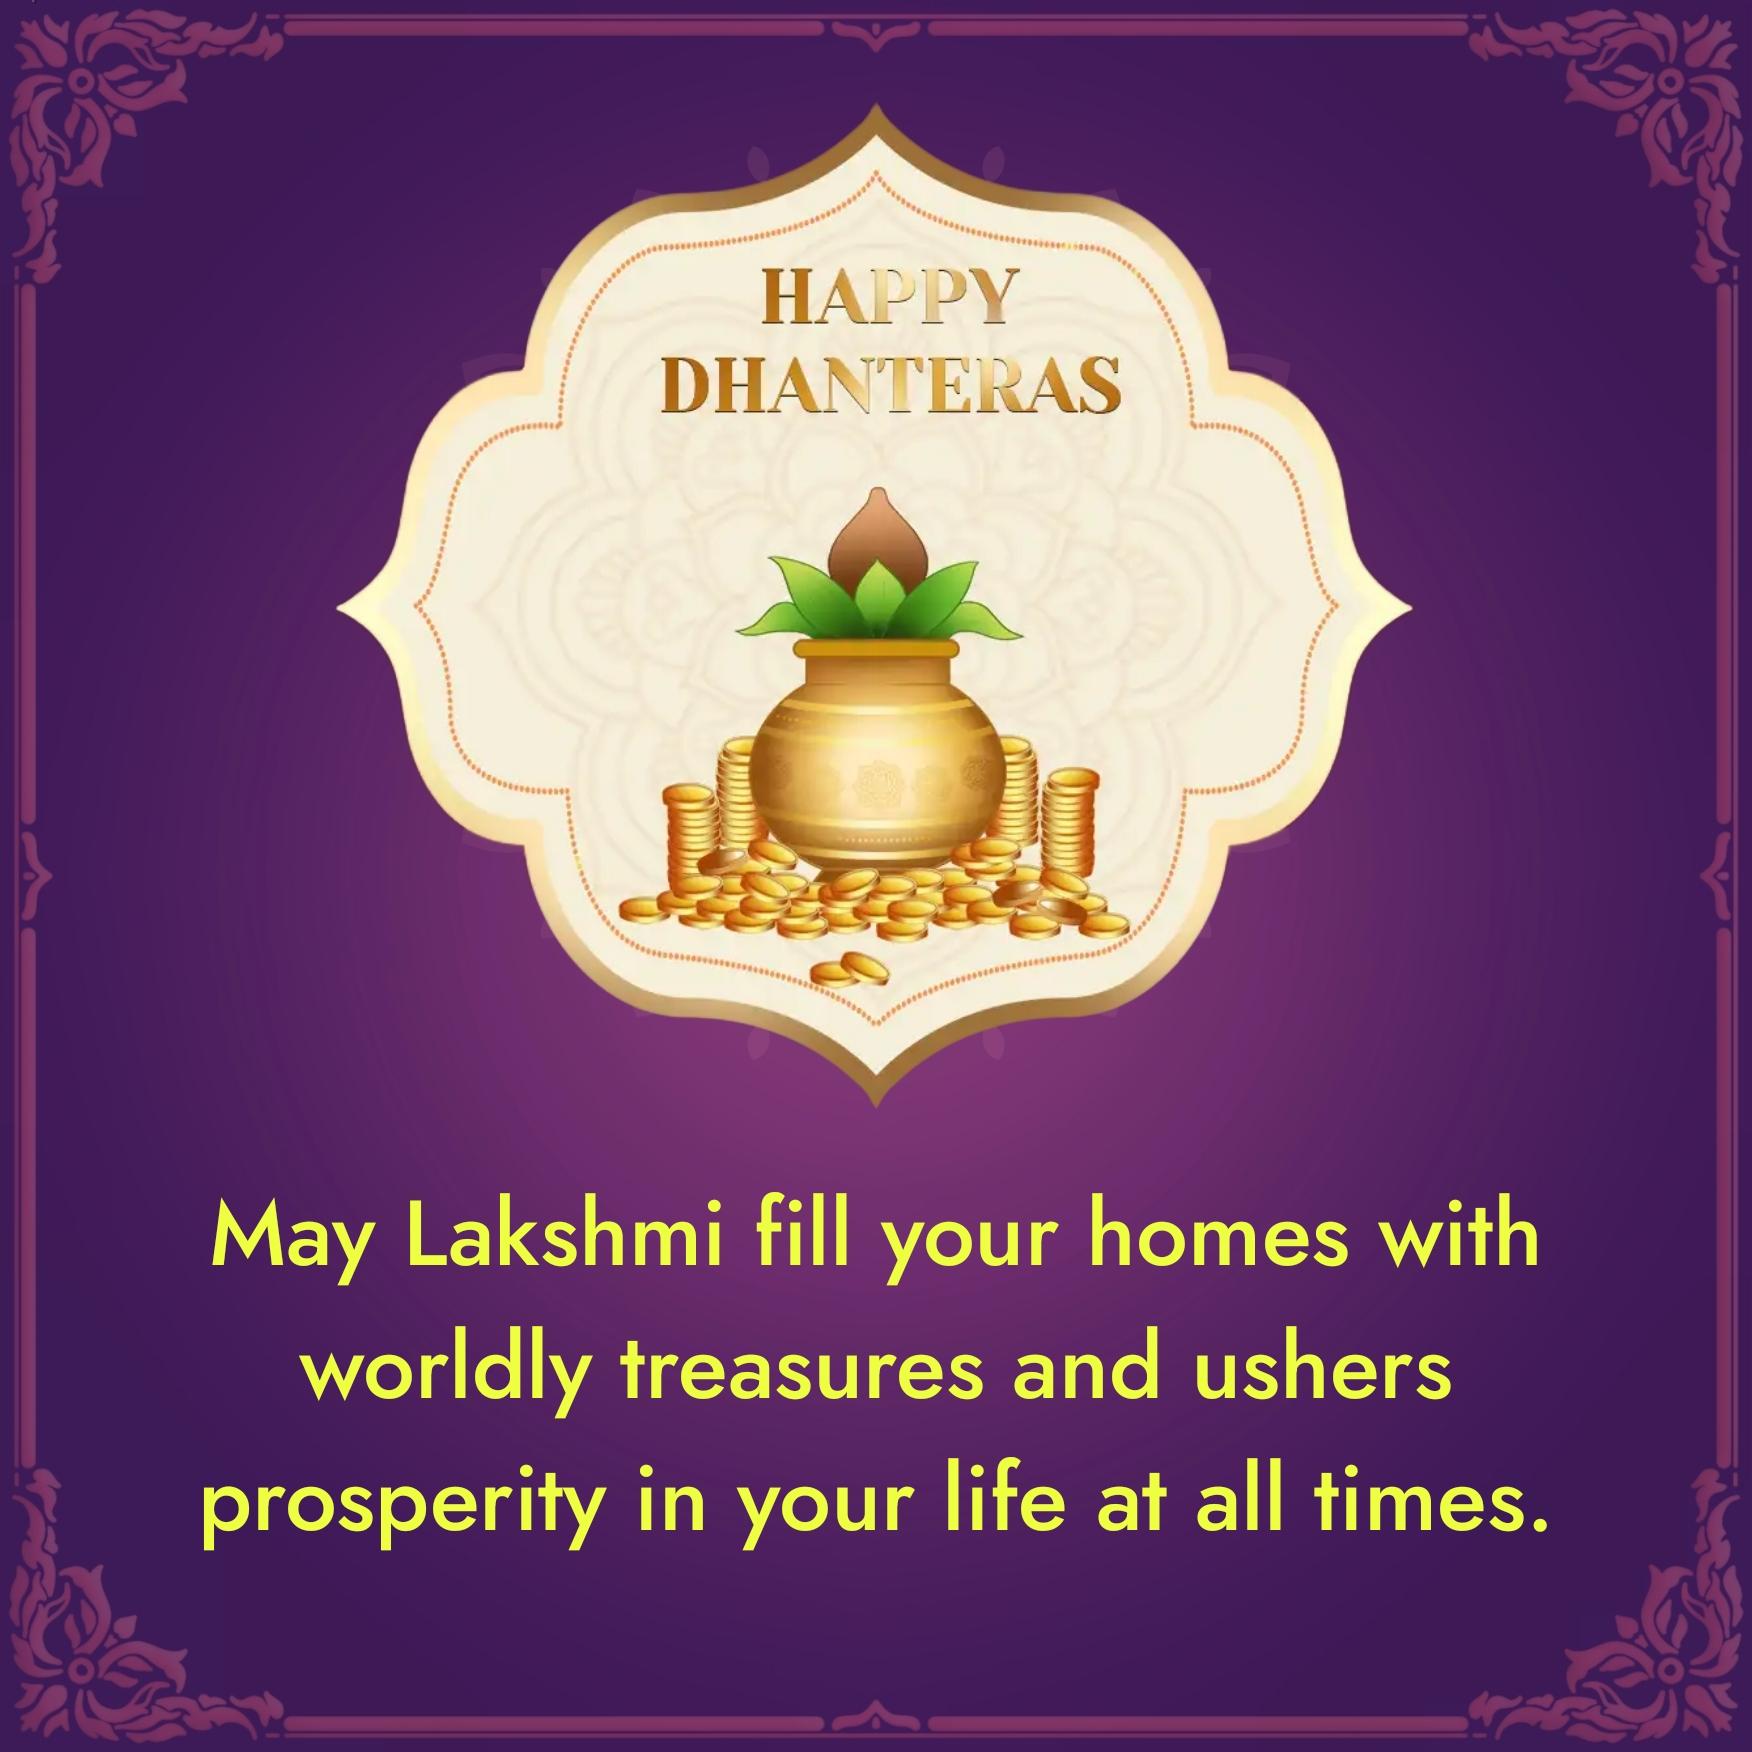 May Lakshmi fill your homes with worldly treasures